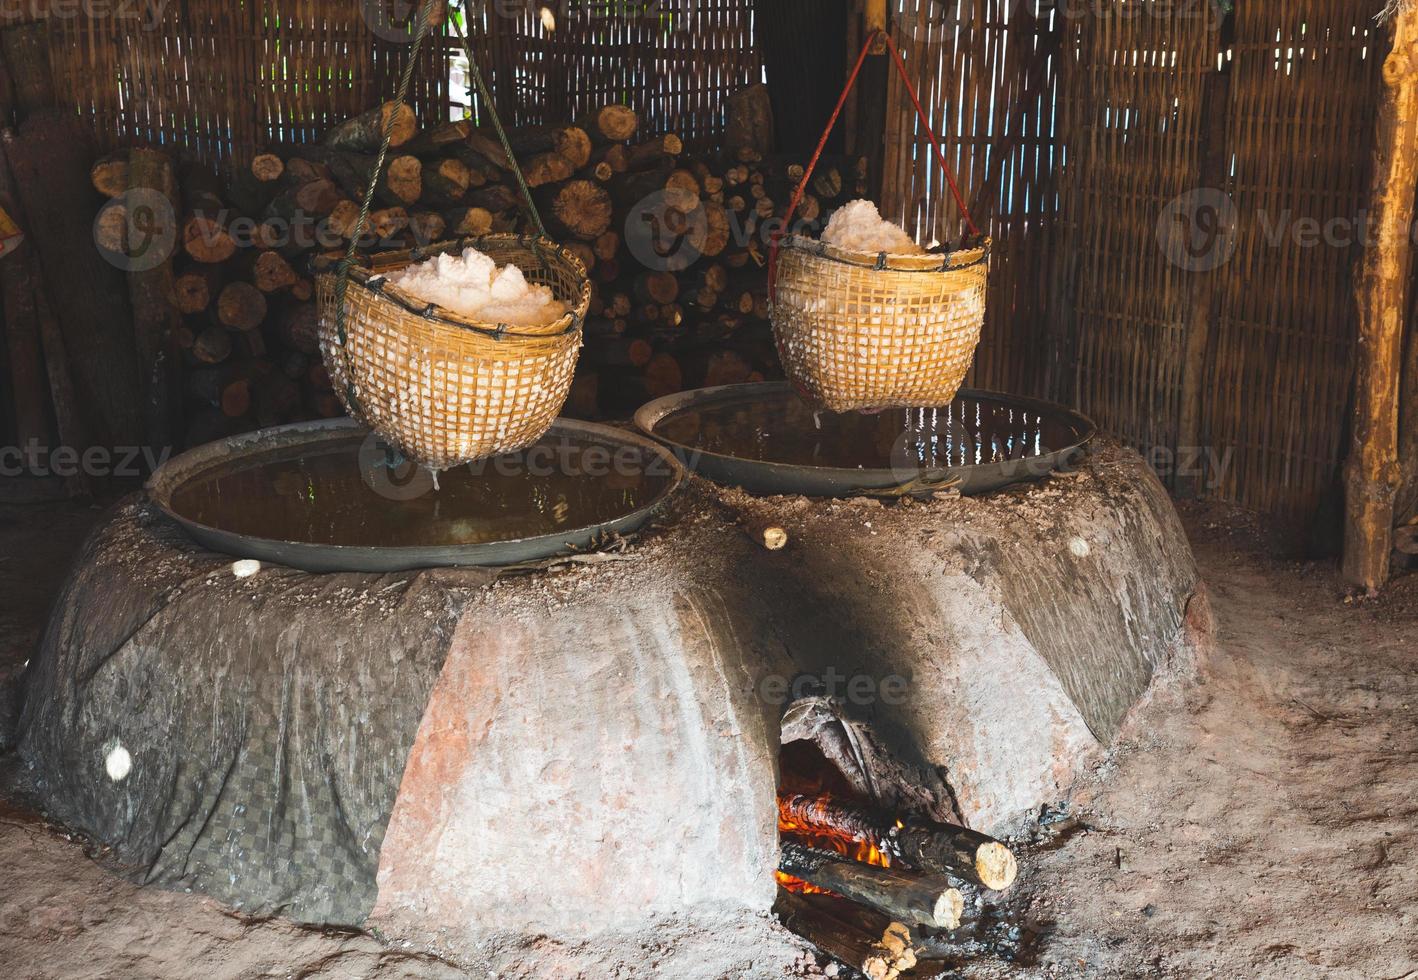 Production of Natural Rock Salt by Boiling Saline From Sinthao Salt Pond in Small Village of Nan, Thailand photo